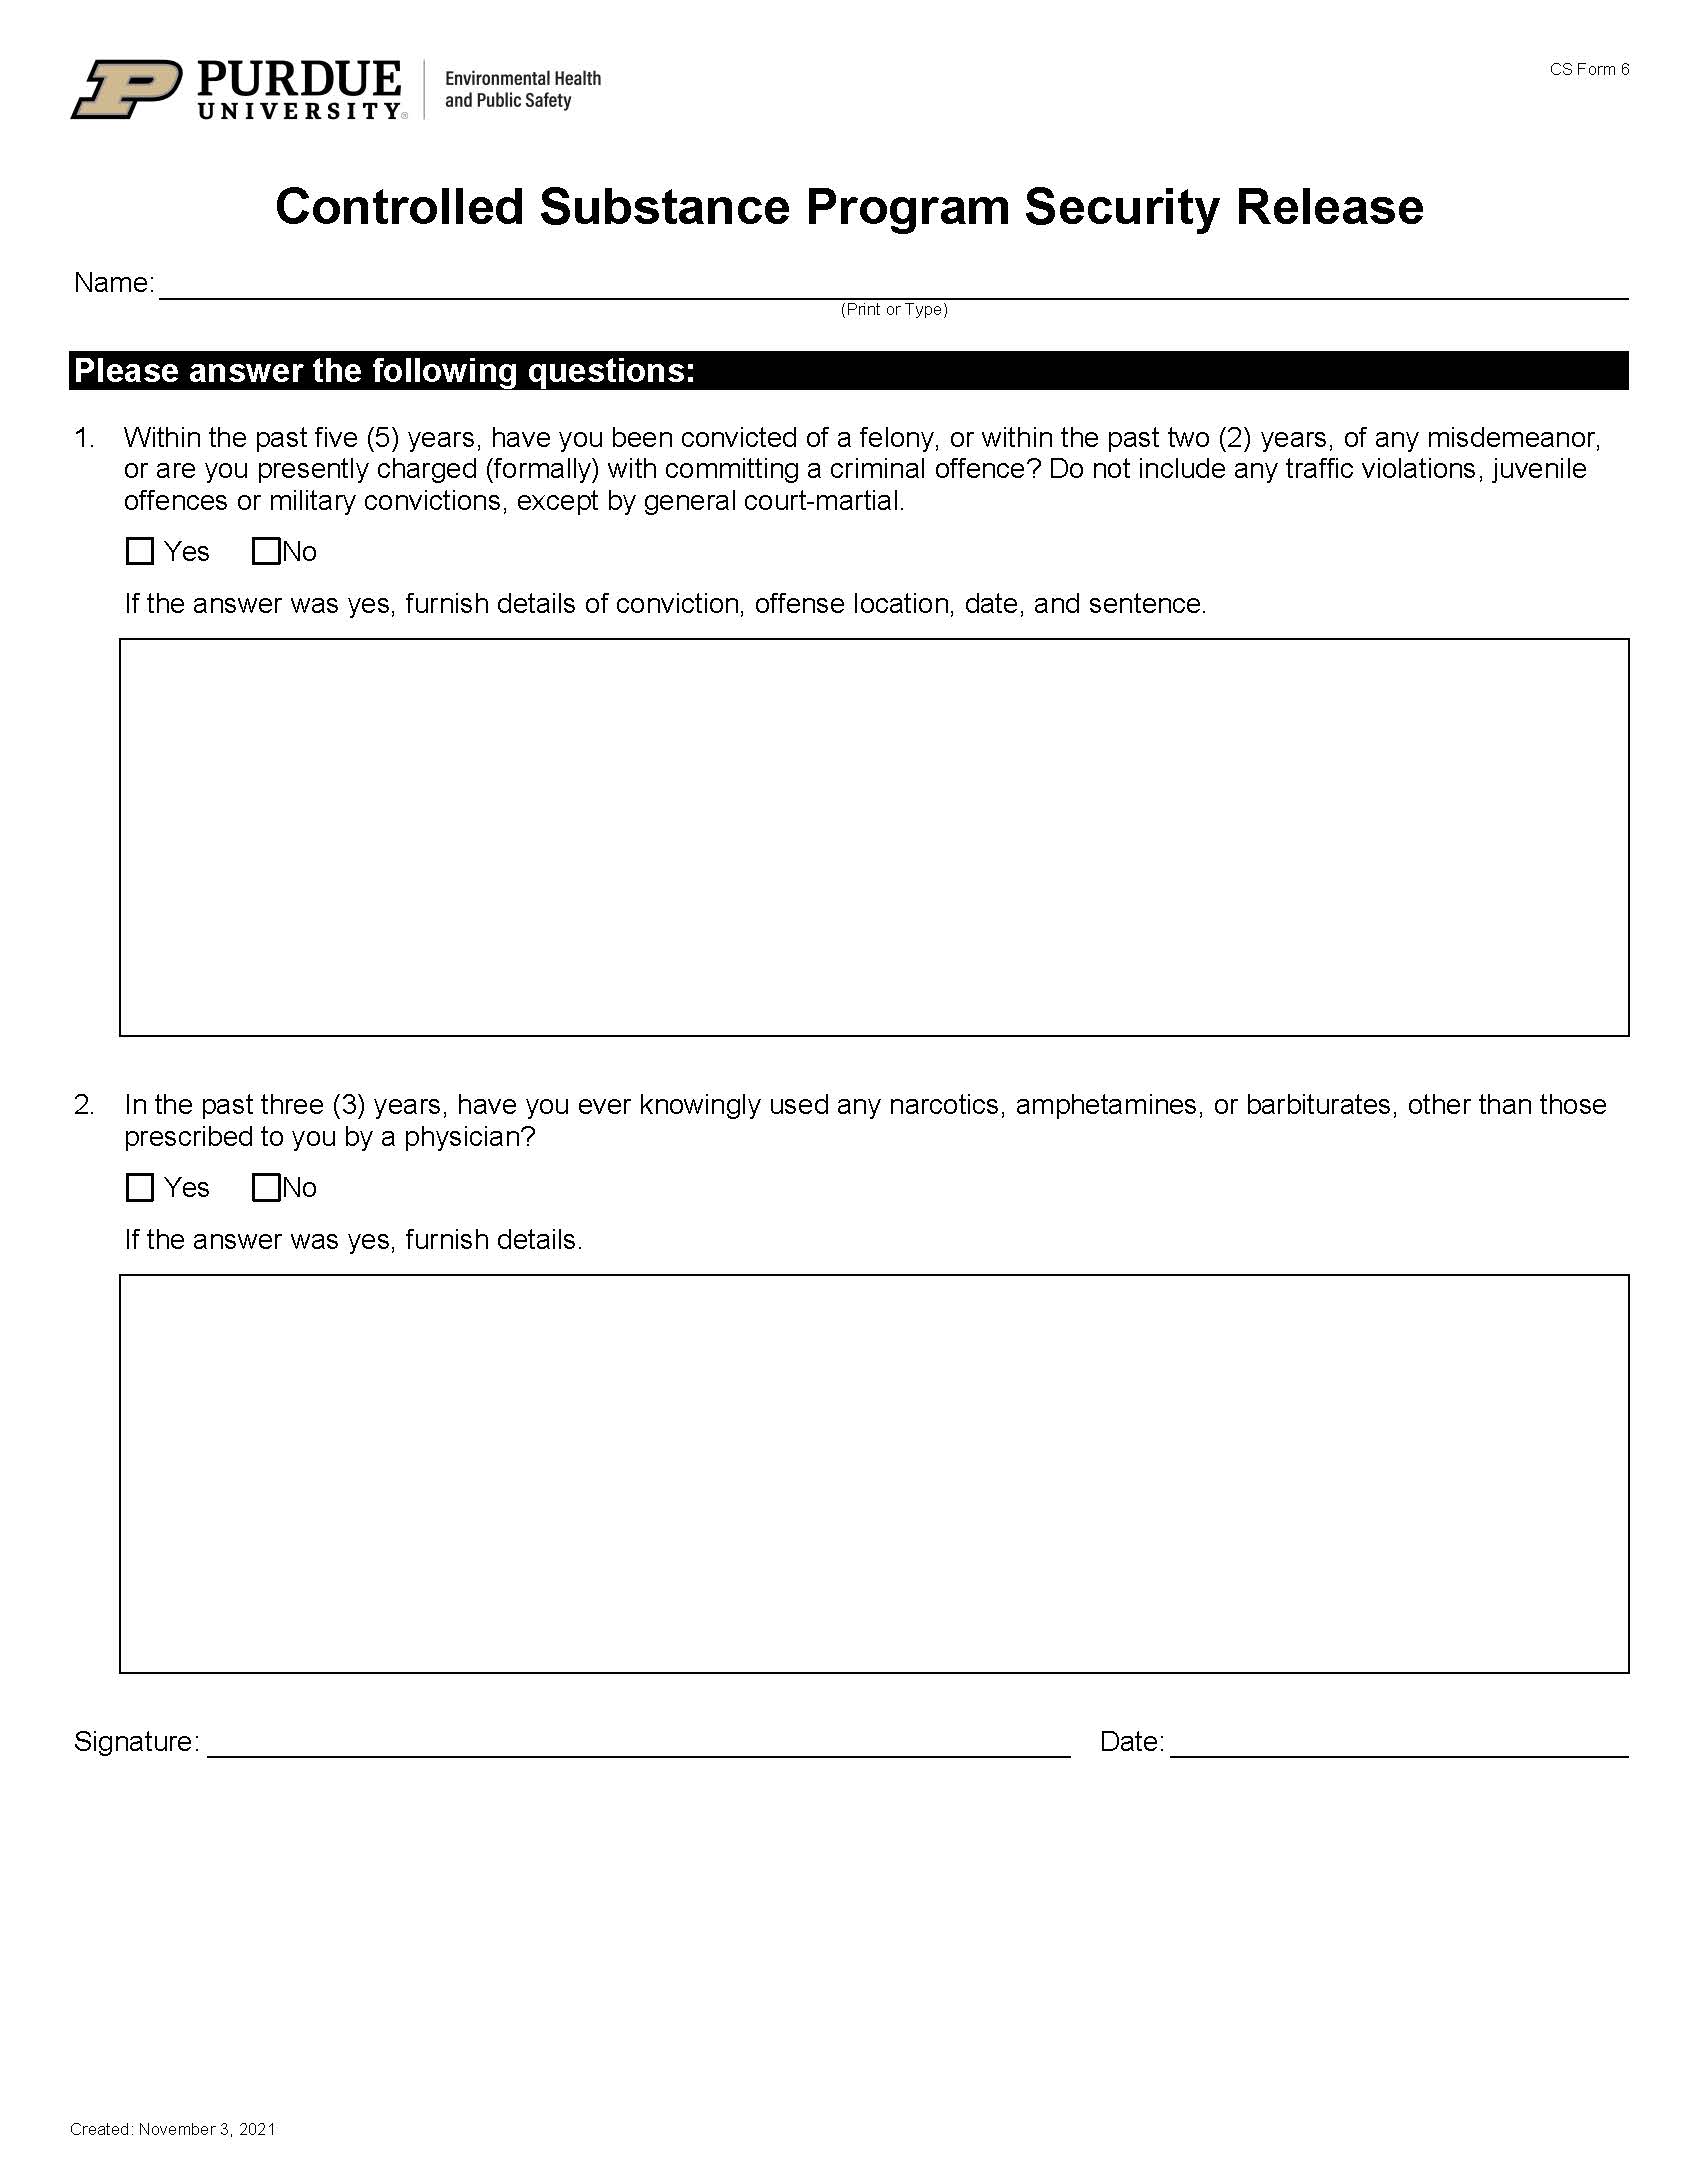 clickable link to the controlled substance security release form